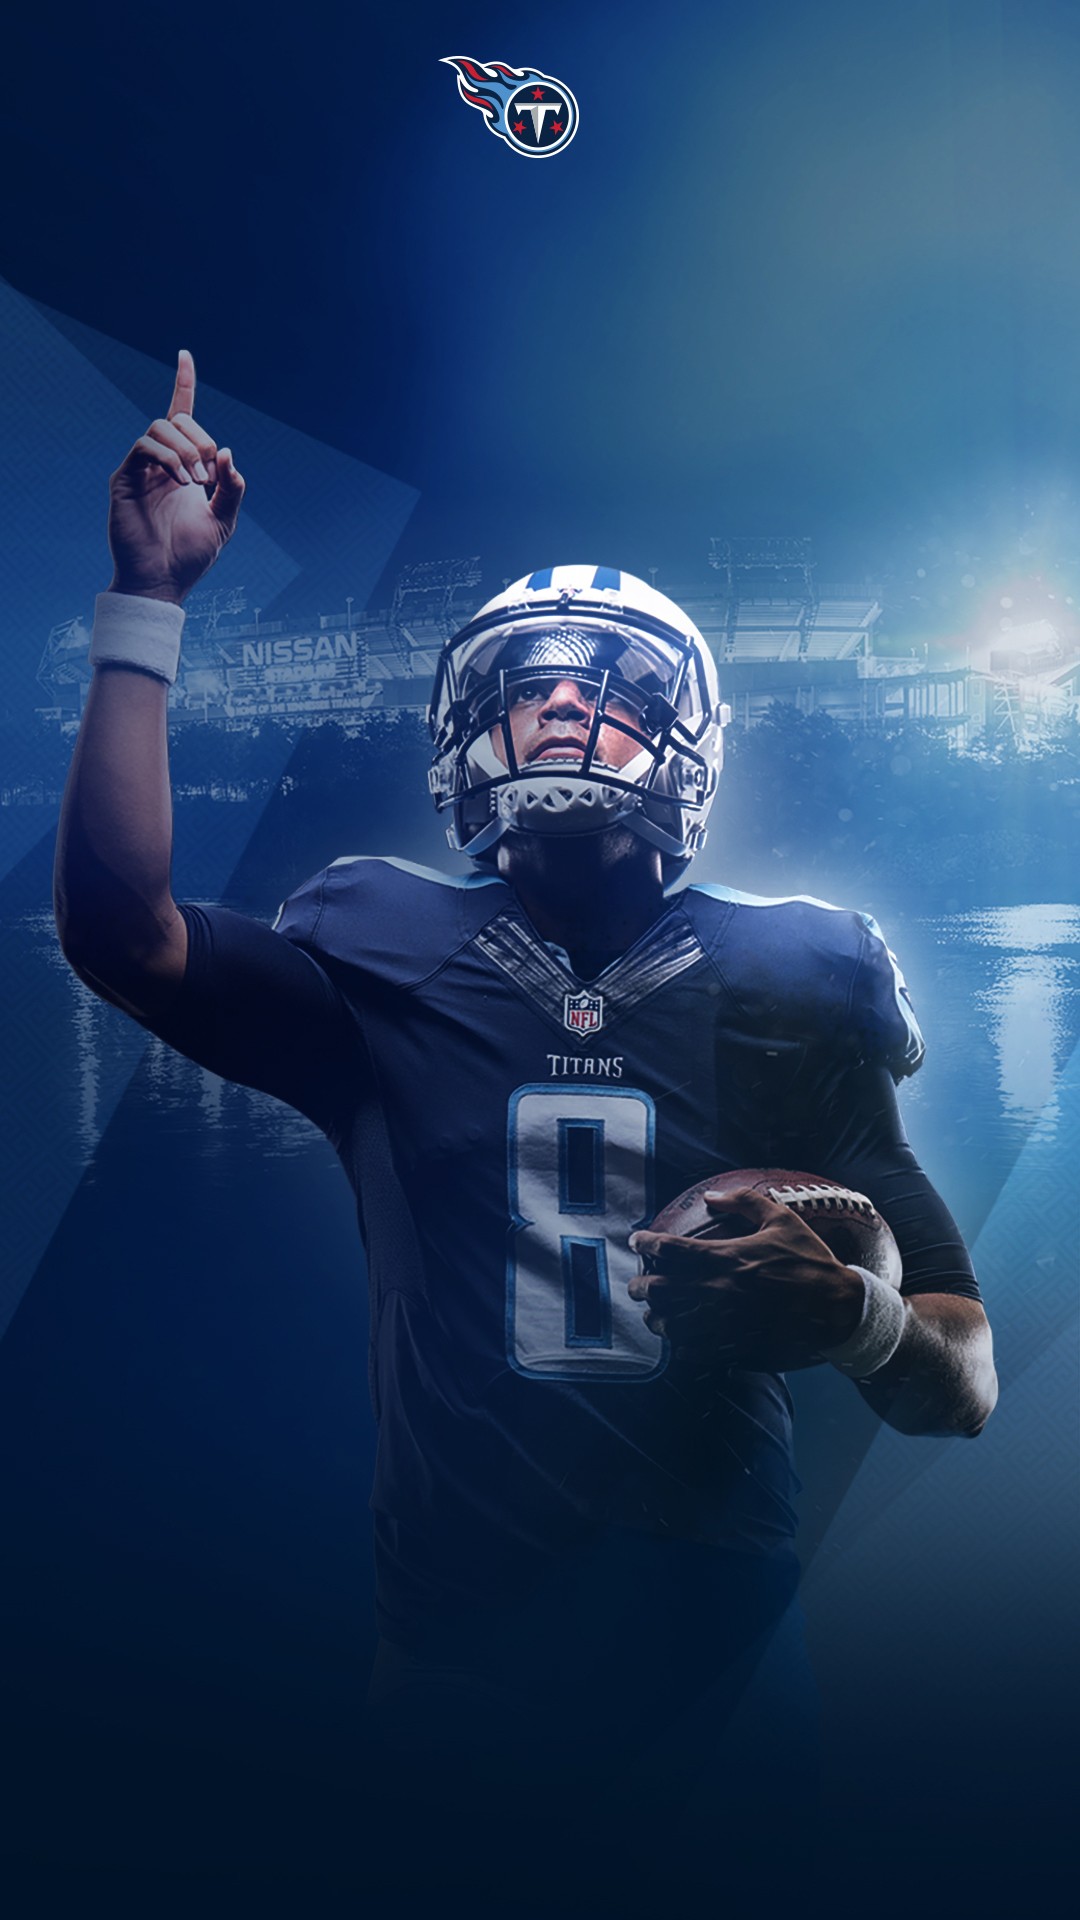 Tennessee Titans Wallpaper For Mobile With high-resolution 1080X1920 pixel. You can use this wallpaper for your Mac or Windows Desktop Background, iPhone, Android or Tablet and another Smartphone device